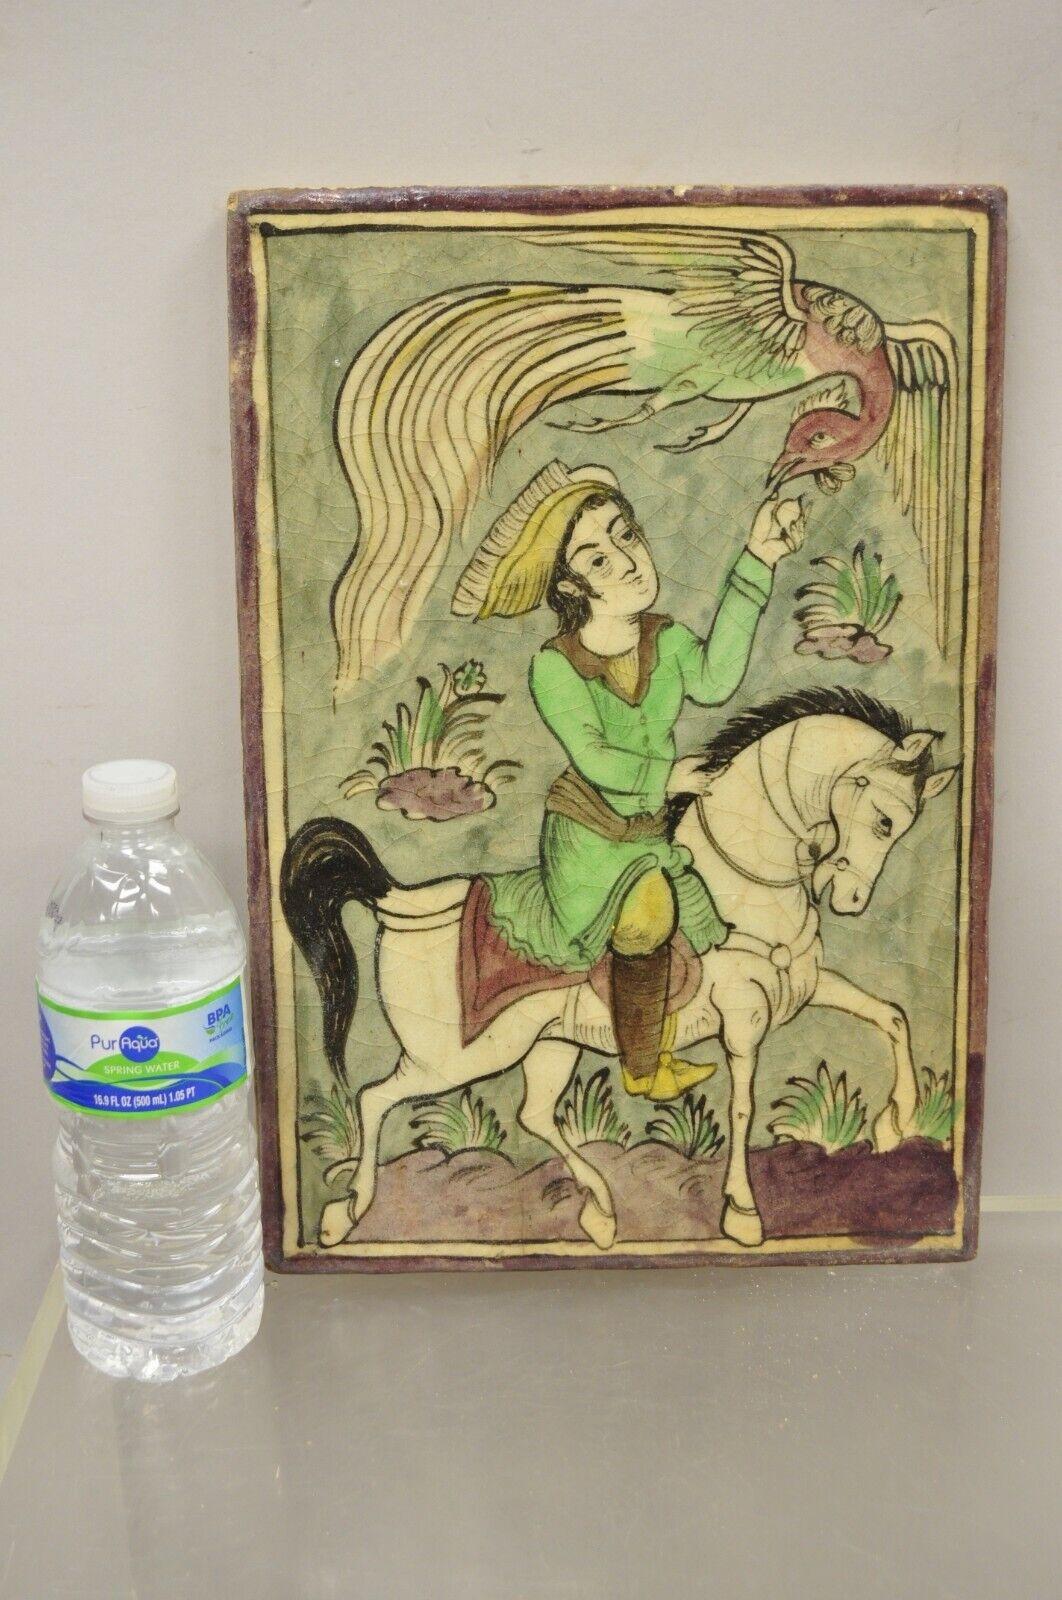 Antique Persian Iznik Qajar Style Ceramic Pottery Tile Green Horse Rider and Phoenix Bird C2. Original crackle glazed finish, heavy ceramic pottery construction, very impressive detail, wonderful style and form. Great to mount as wall art or accent